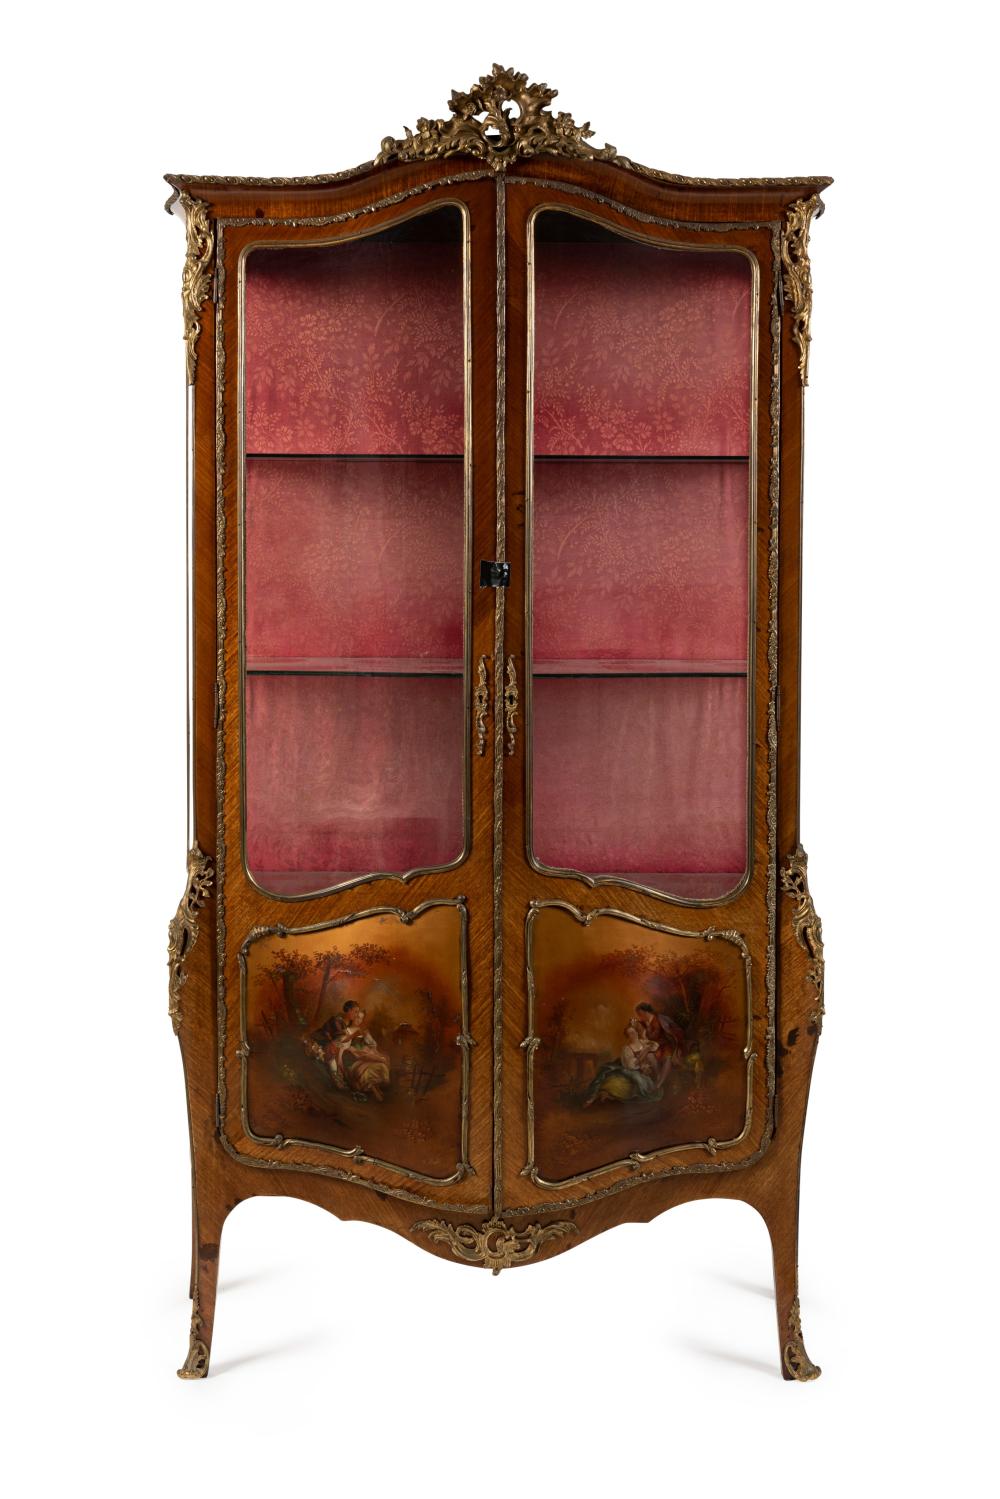 A Louis XV Style Painted And Gilt Metal Mounted Kingwood Display Cabinet, Late 19th Century / Early 20th Century